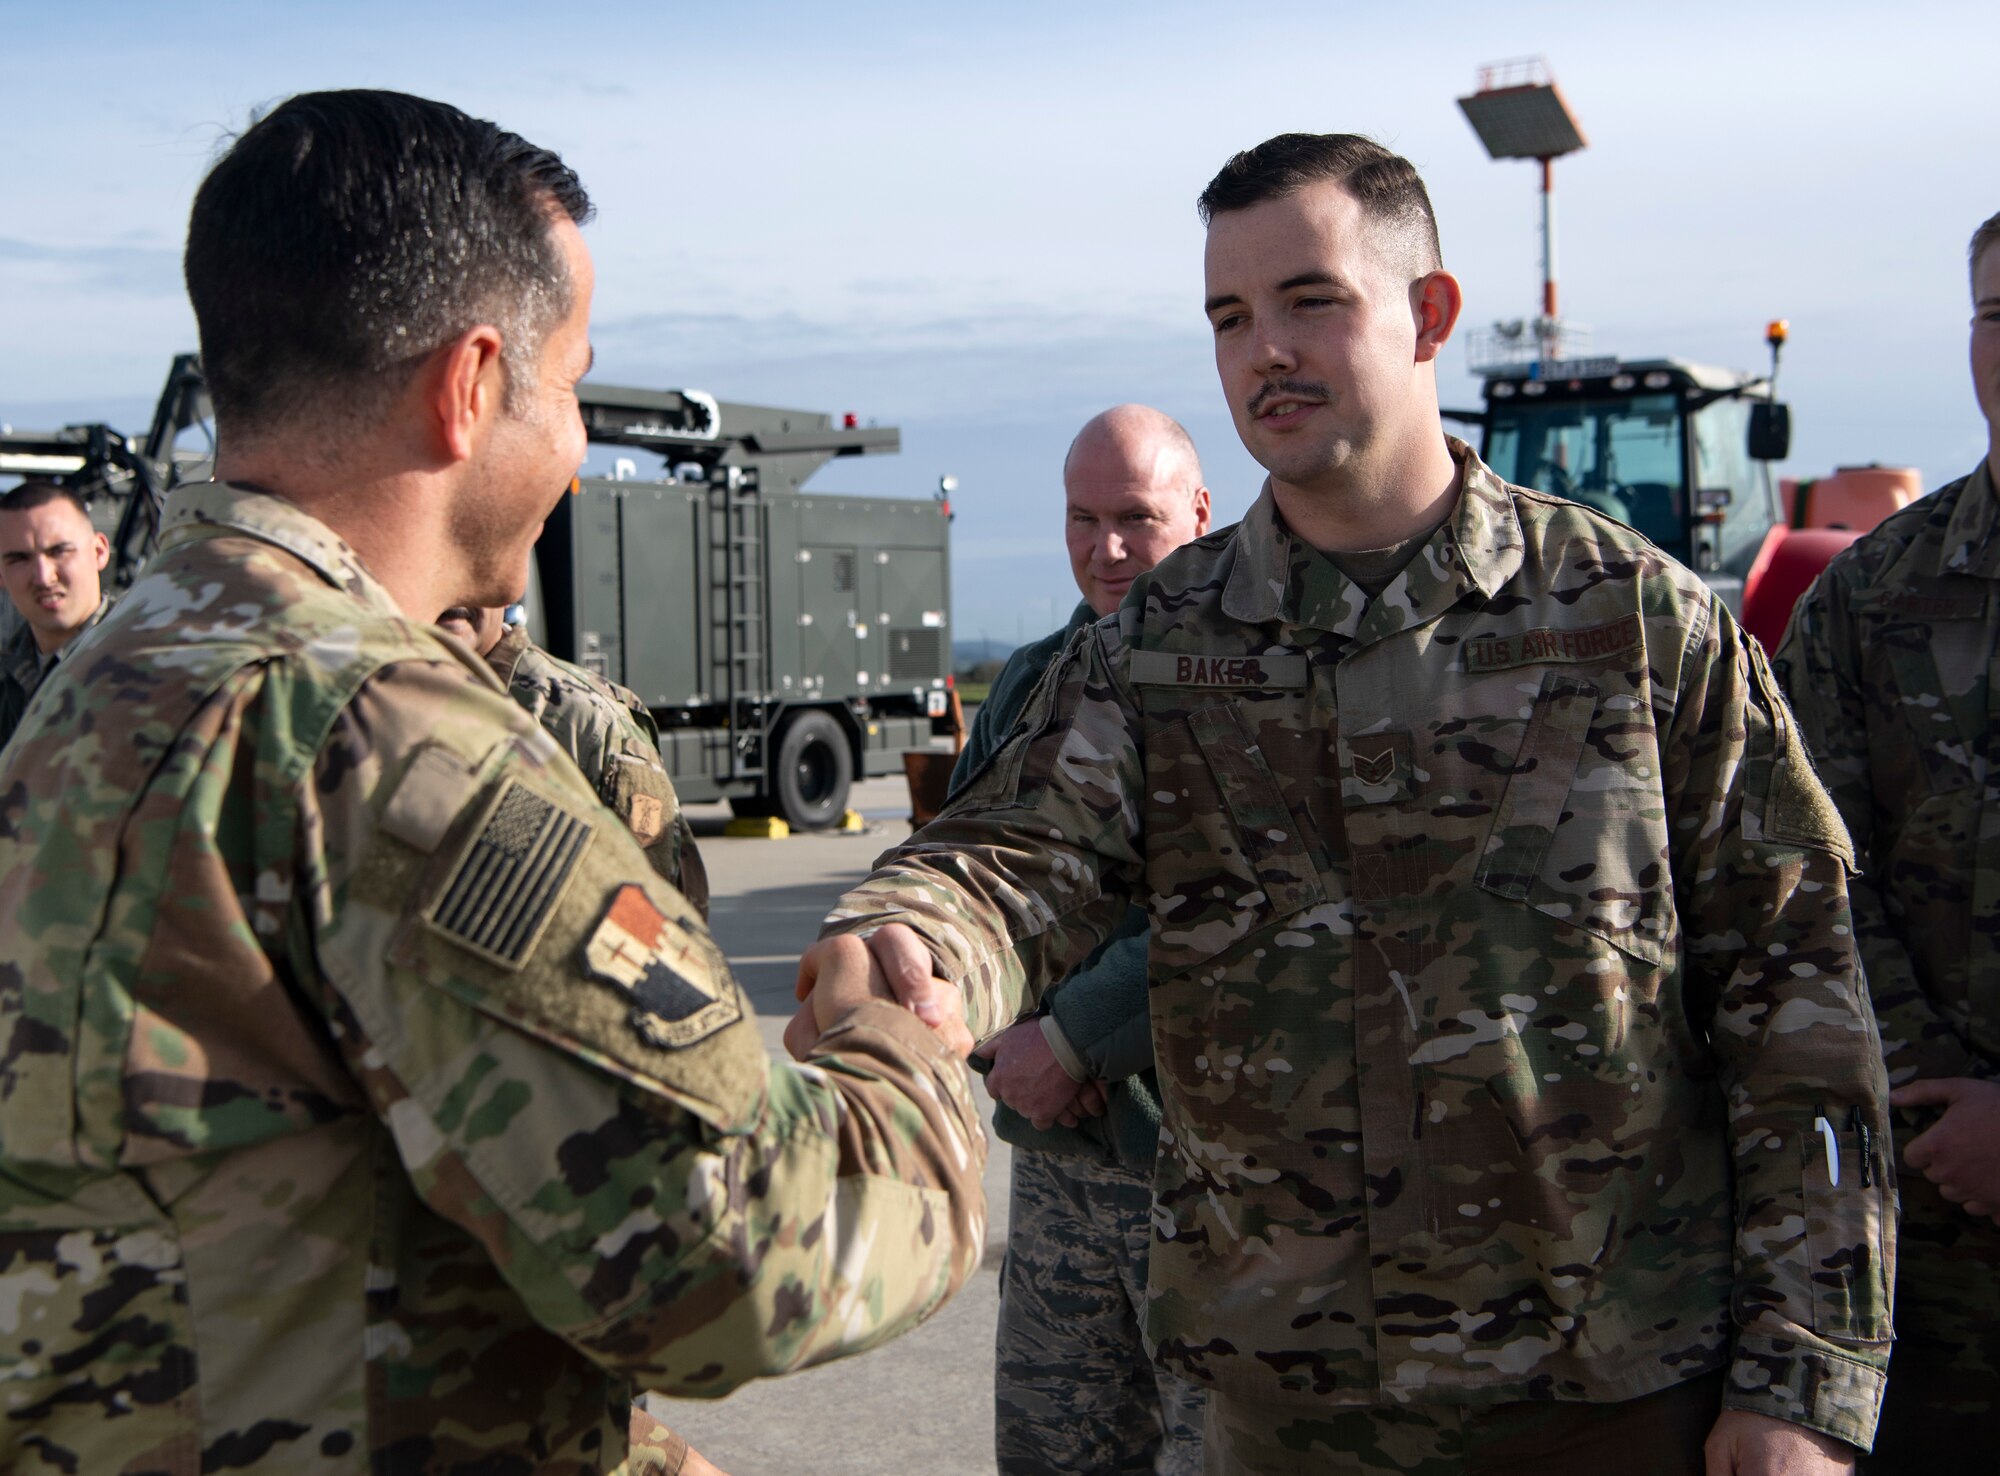 U.S. Air Force Col. Jason Hokaj, 52nd Fighter Wing vice commander, left, shakes hands with Staff Sgt. Nathan Baker, 52nd Logistics Readiness Squadron NCO in charge of vehicle maintenance, right, during a snow and ice parade at Spangdahlem Air Base, Germany, Nov. 8, 2019. The parade gave 52nd FW leadership a chance to become familiar with machinery used during inclement winter weather on the flightline. (U.S. Air Force photo by Staff Sgt. Preston Cherry)